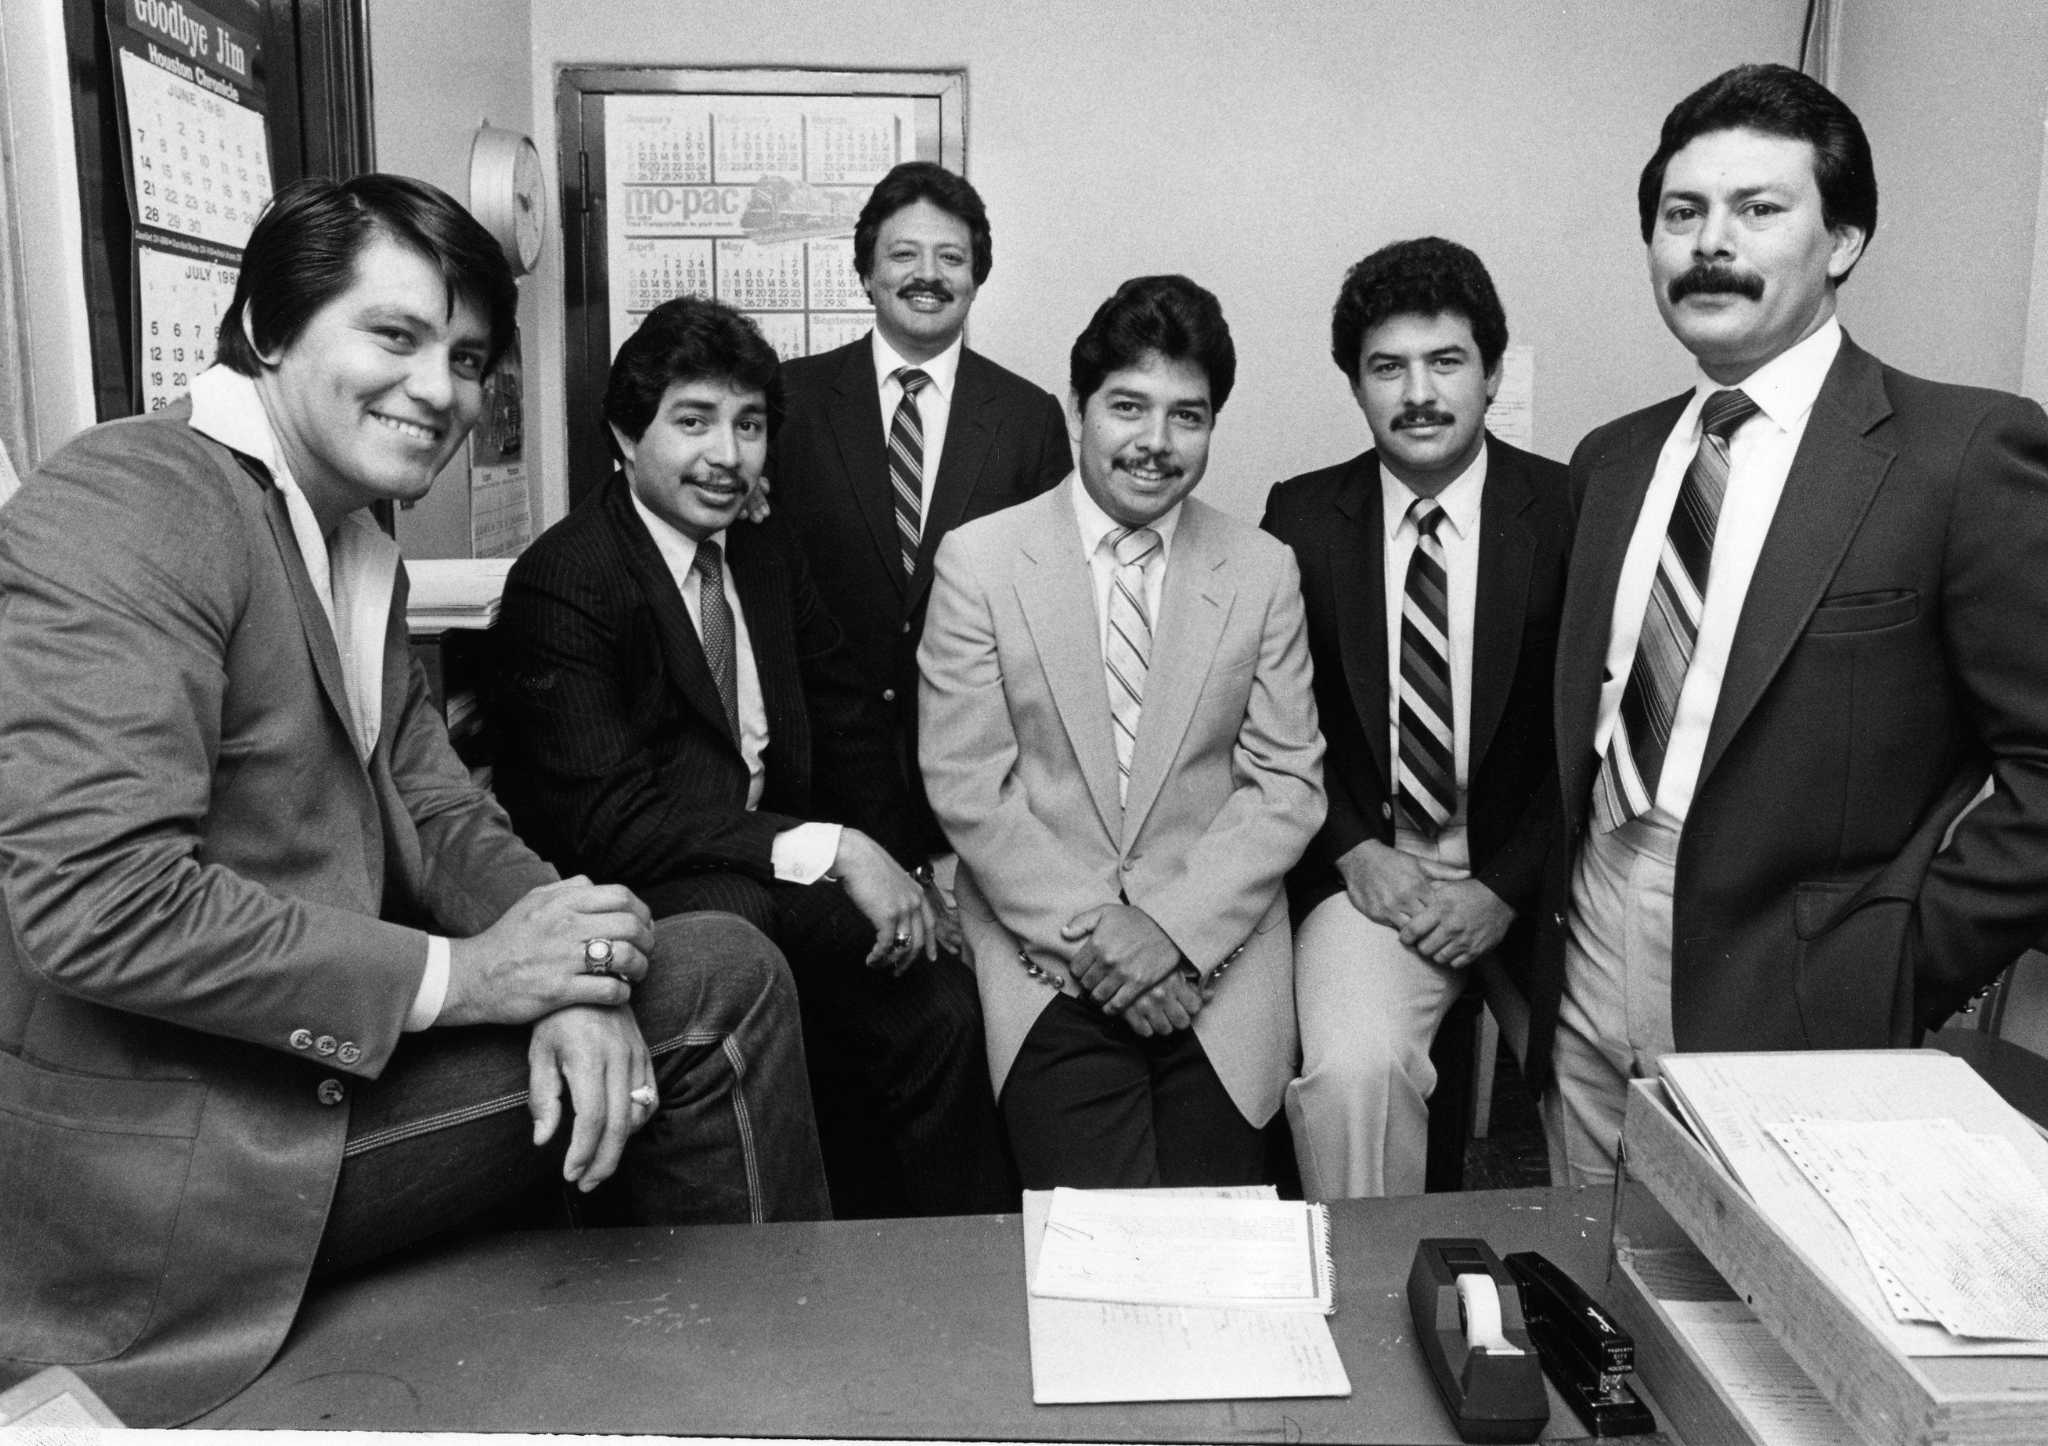 Houston's 1979 Chicano Squad solved so many murder cases, it changed